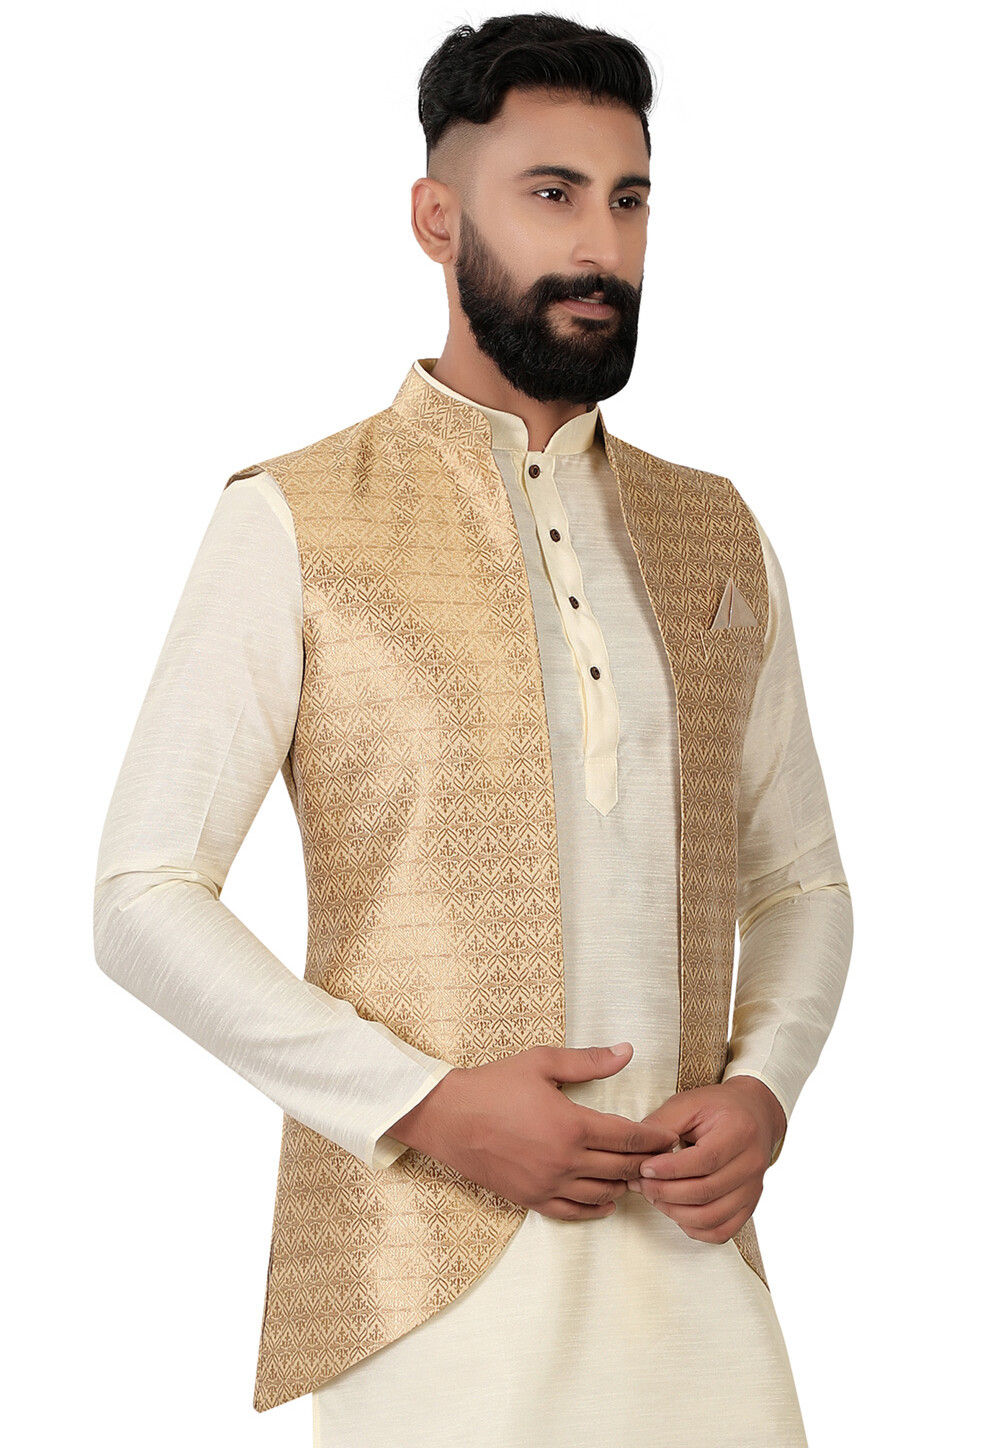 S H A H I T A J Traditional Barati/Groom/Social Occasions Silk Golden  Floral Nehru Jacket or Kothi for Adults (MW888) | Shahi Taj | Since 1960